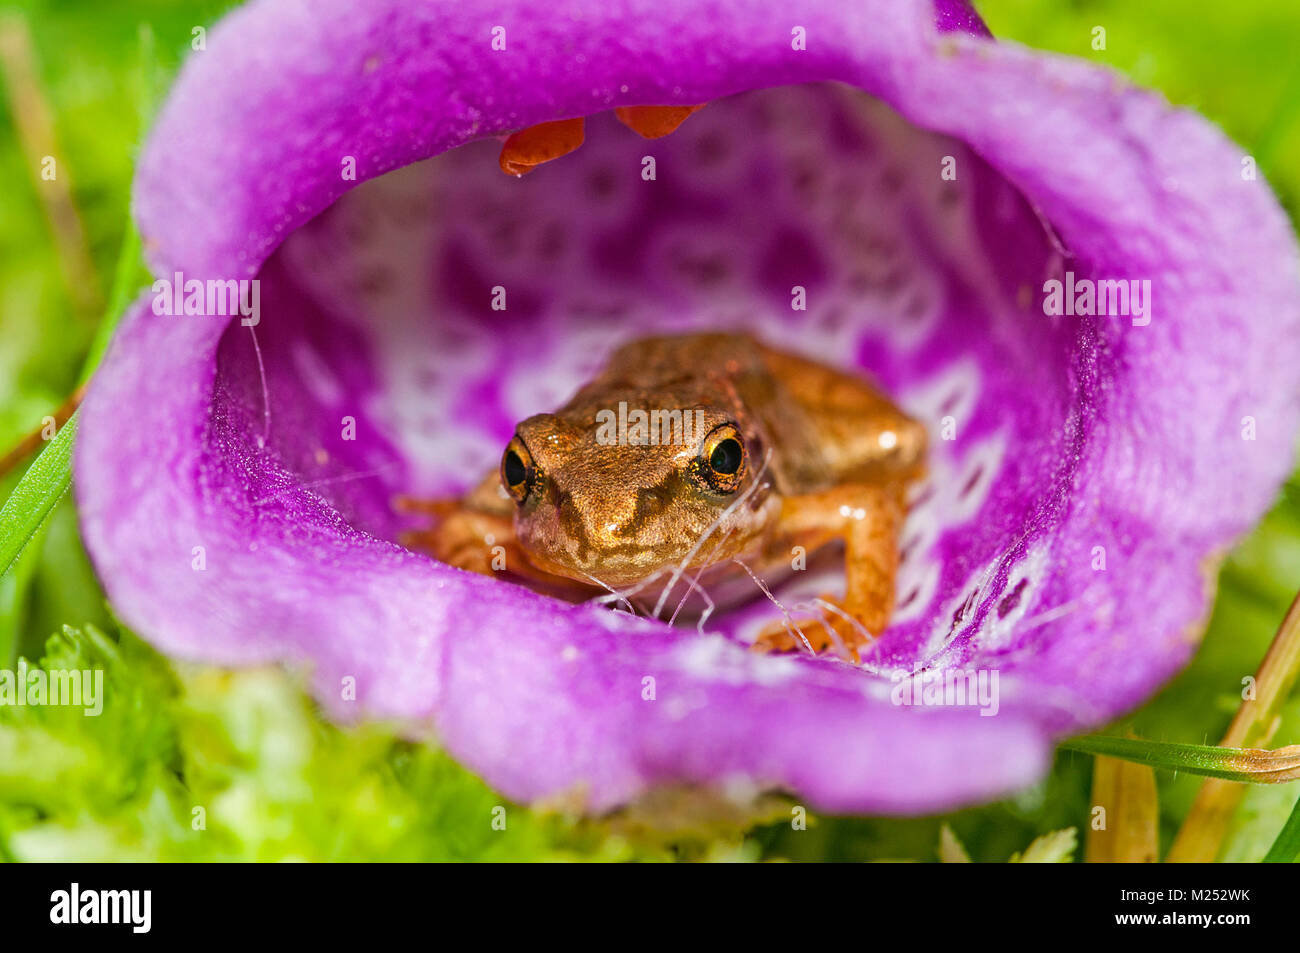 Common frog hiding inside a Foxglove flower in the New Forest National Park, Hampshire, UK Stock Photo